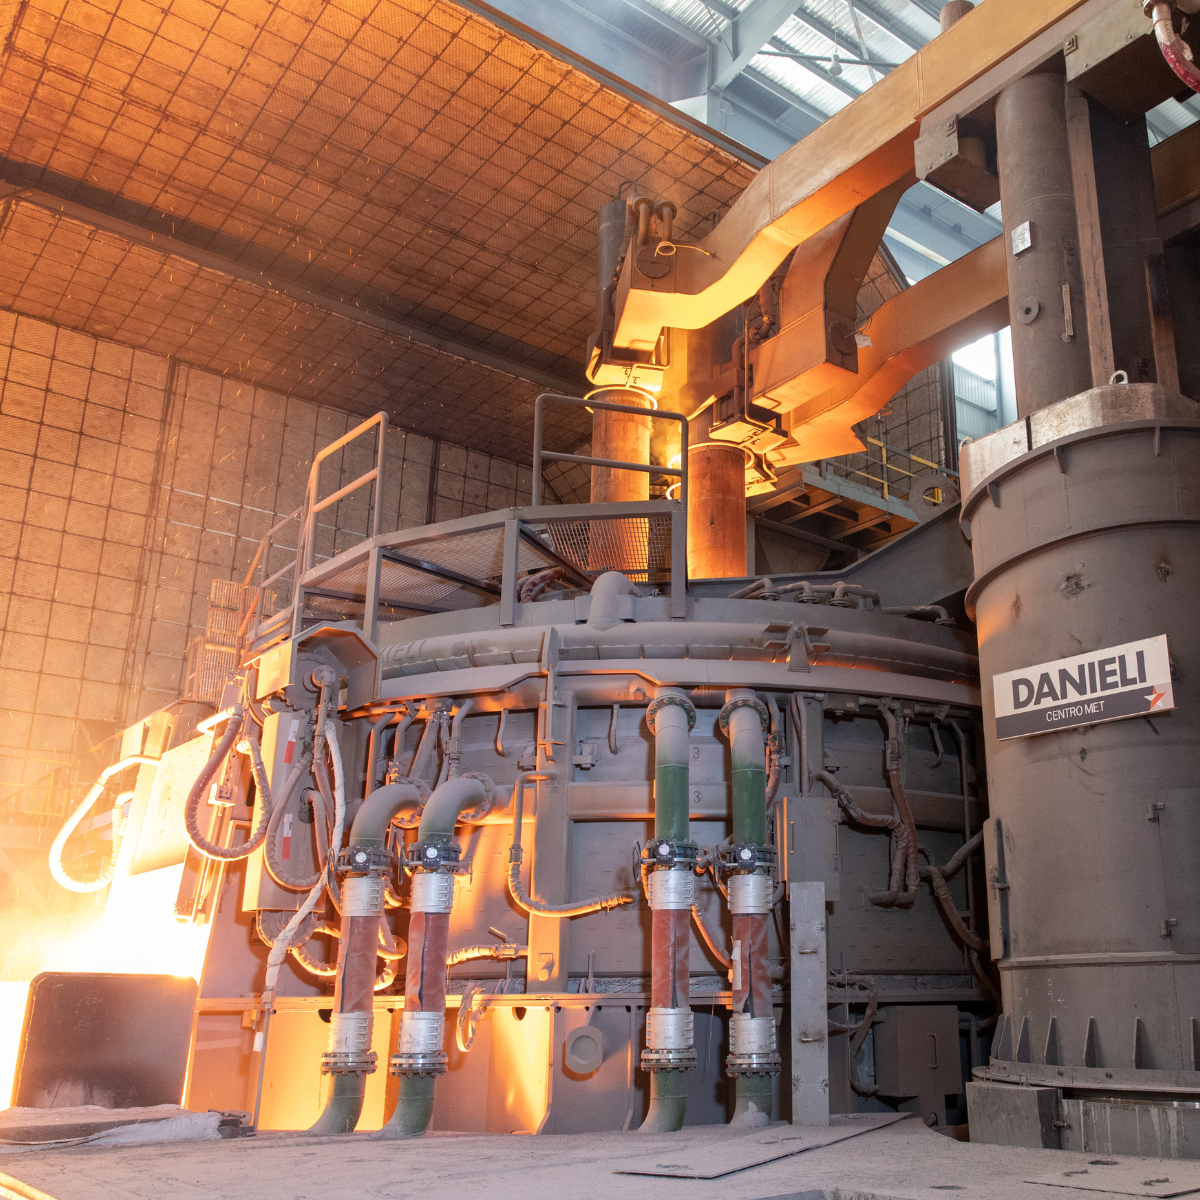 LIBERTY Steel in Whyalla announces the phase out of coal-based steelmaking with purchase of a low carbon emissions electric arc furnace